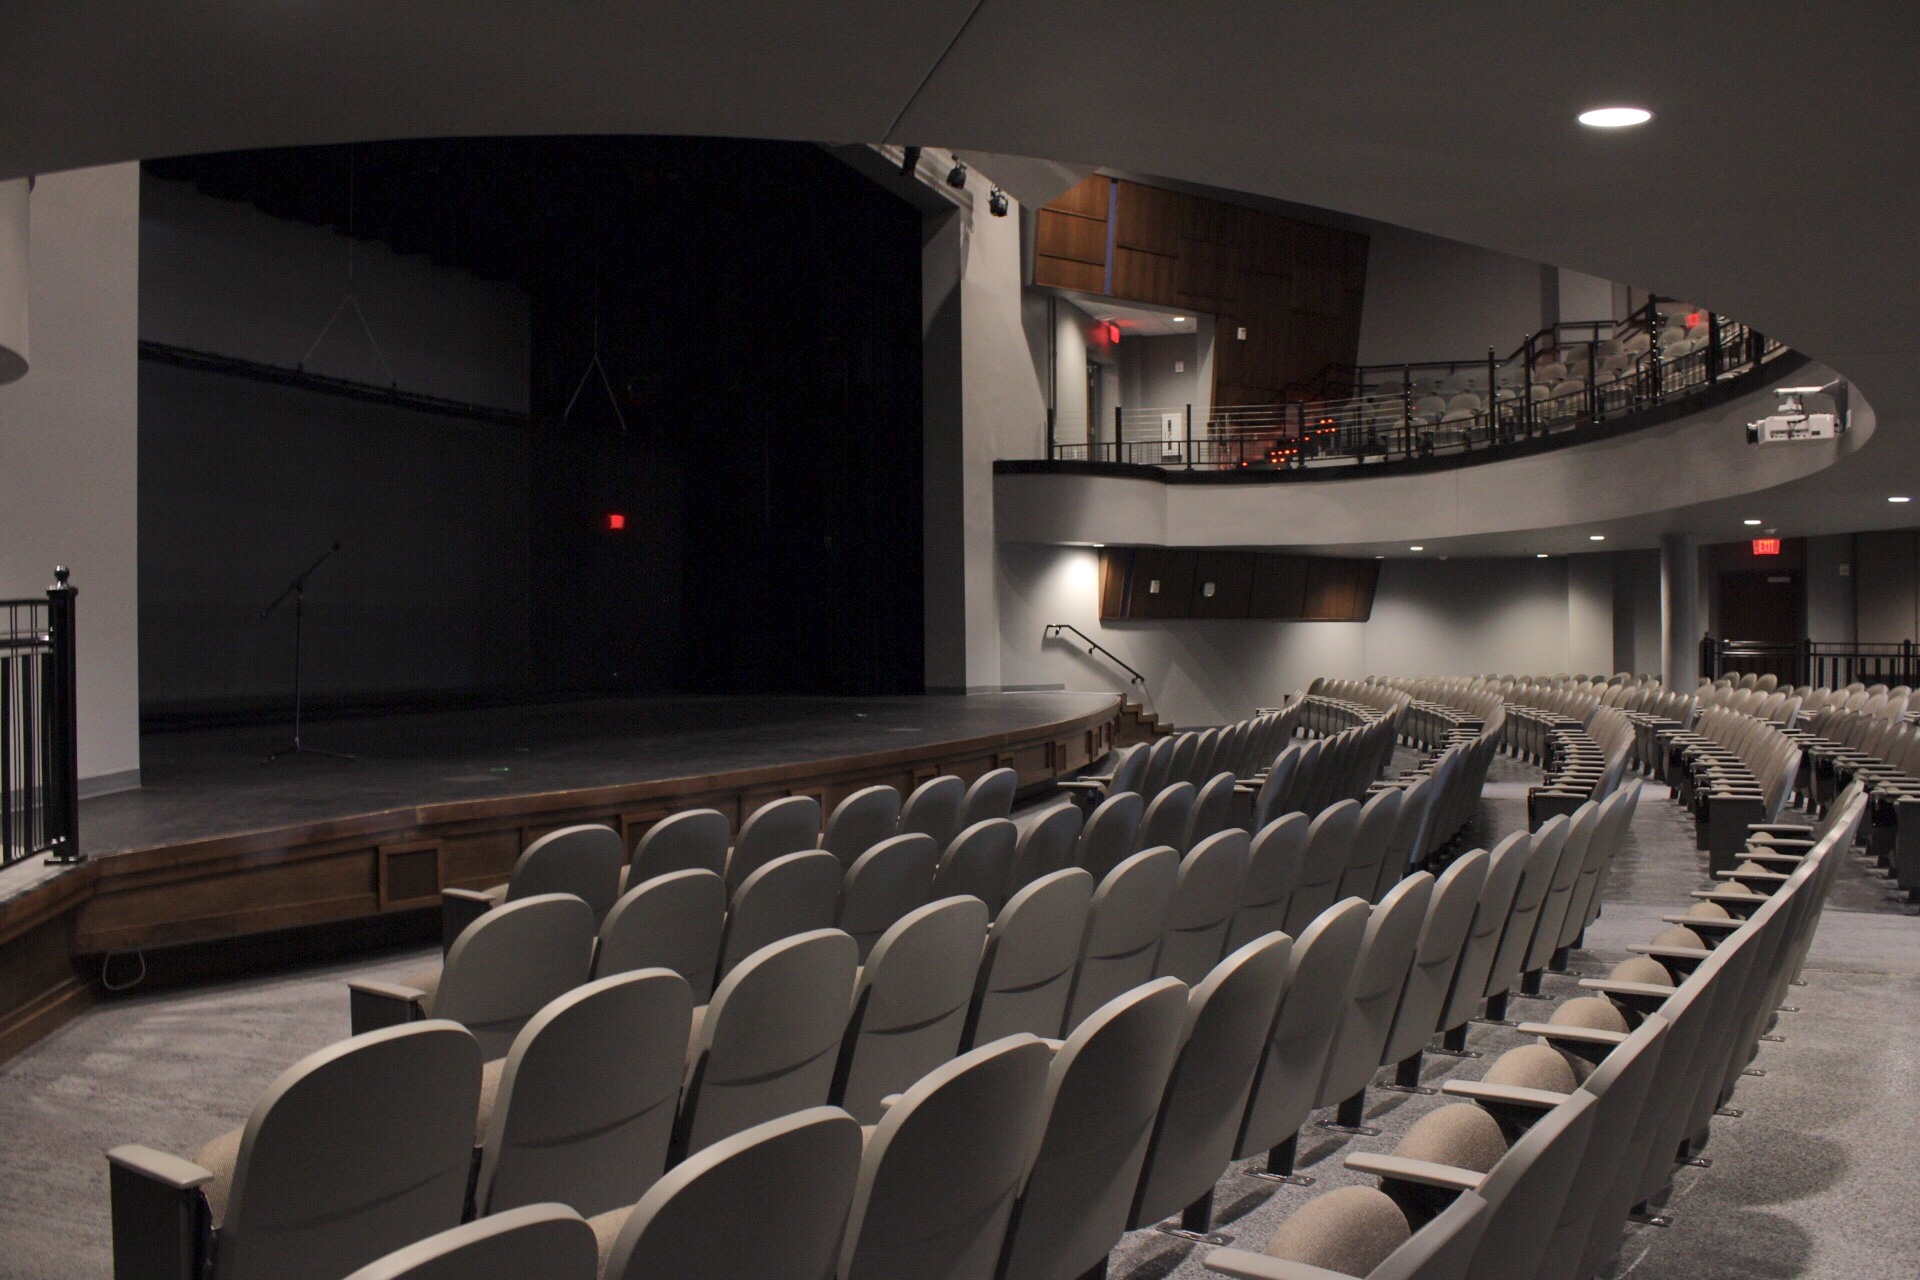 Auditorium seats, balcony and stage.